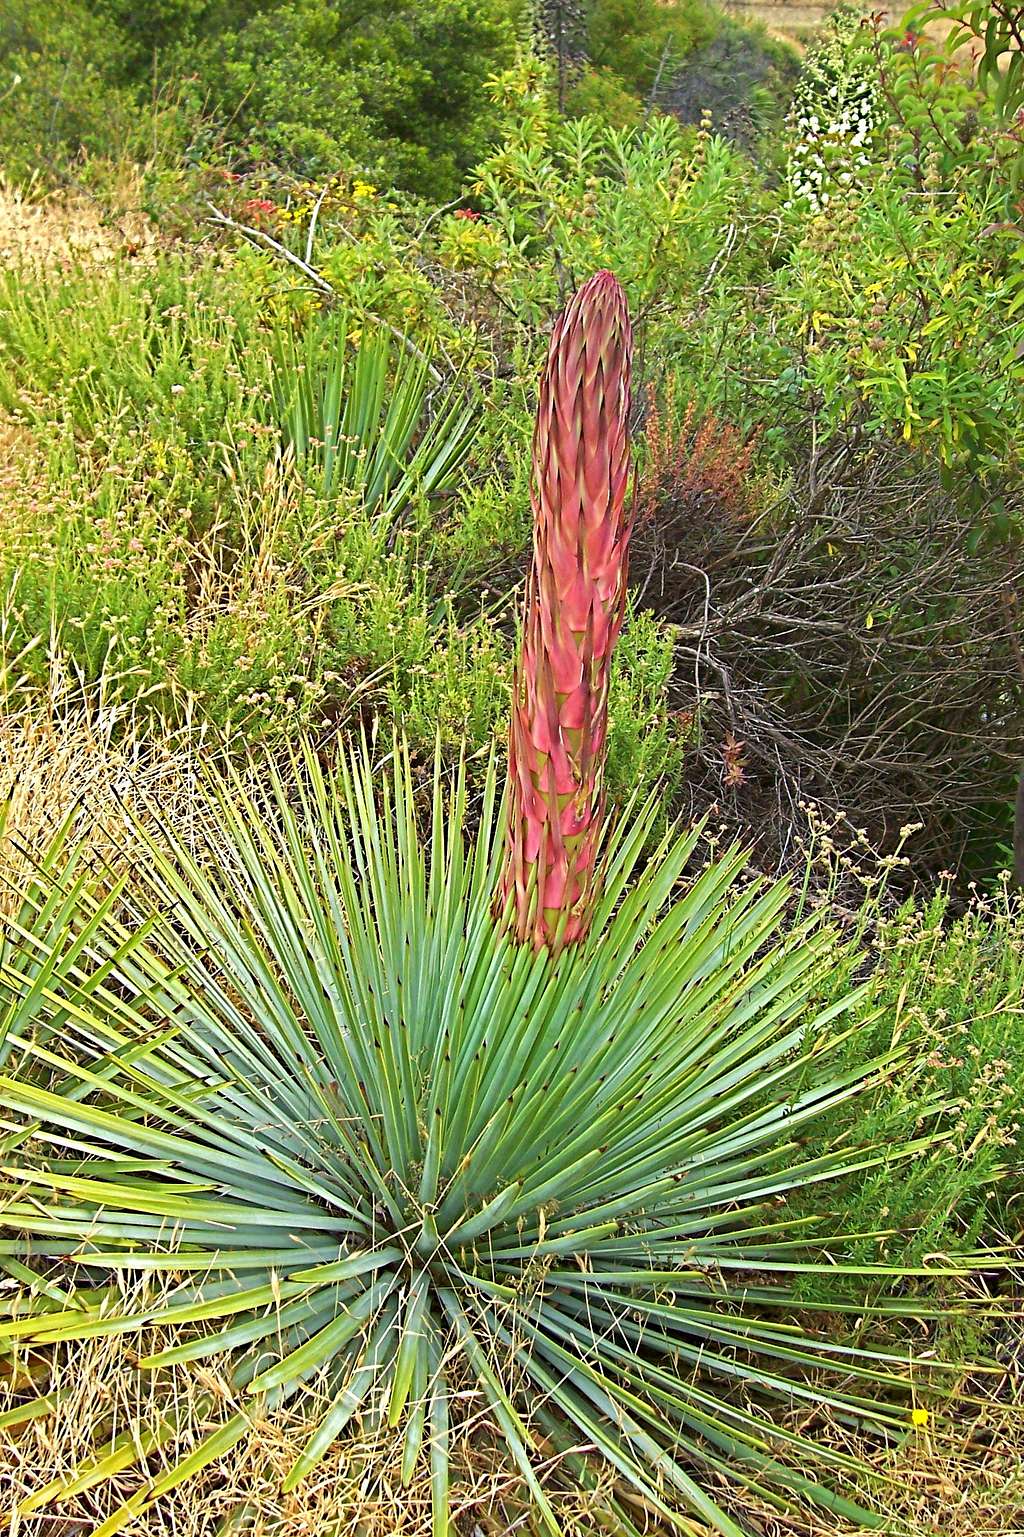 Yucca Plant ready to bloom